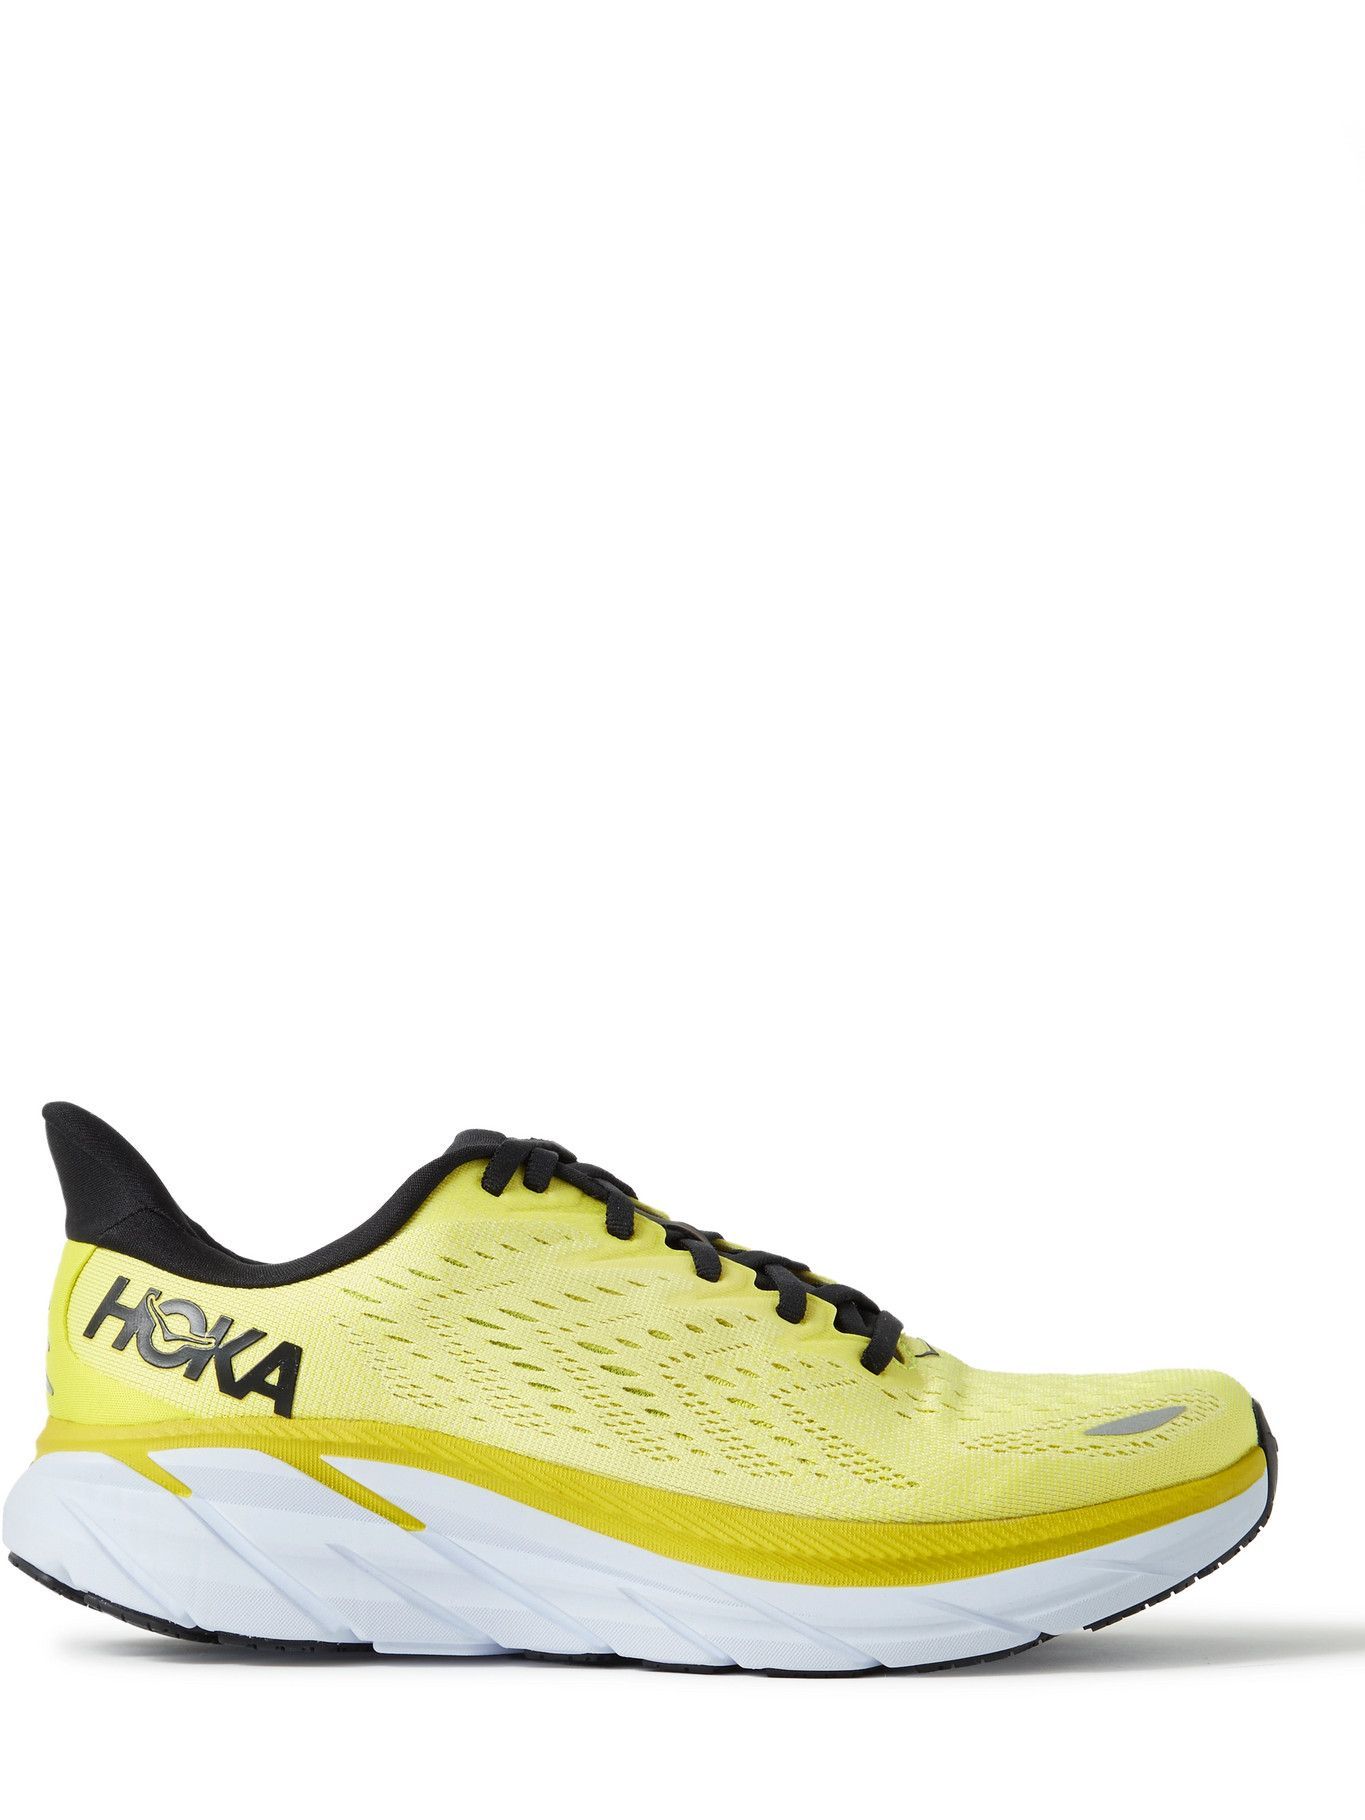 Hoka One One - Clifton 8 Rubber-Trimmed Mesh Running Sneakers - Yellow ...